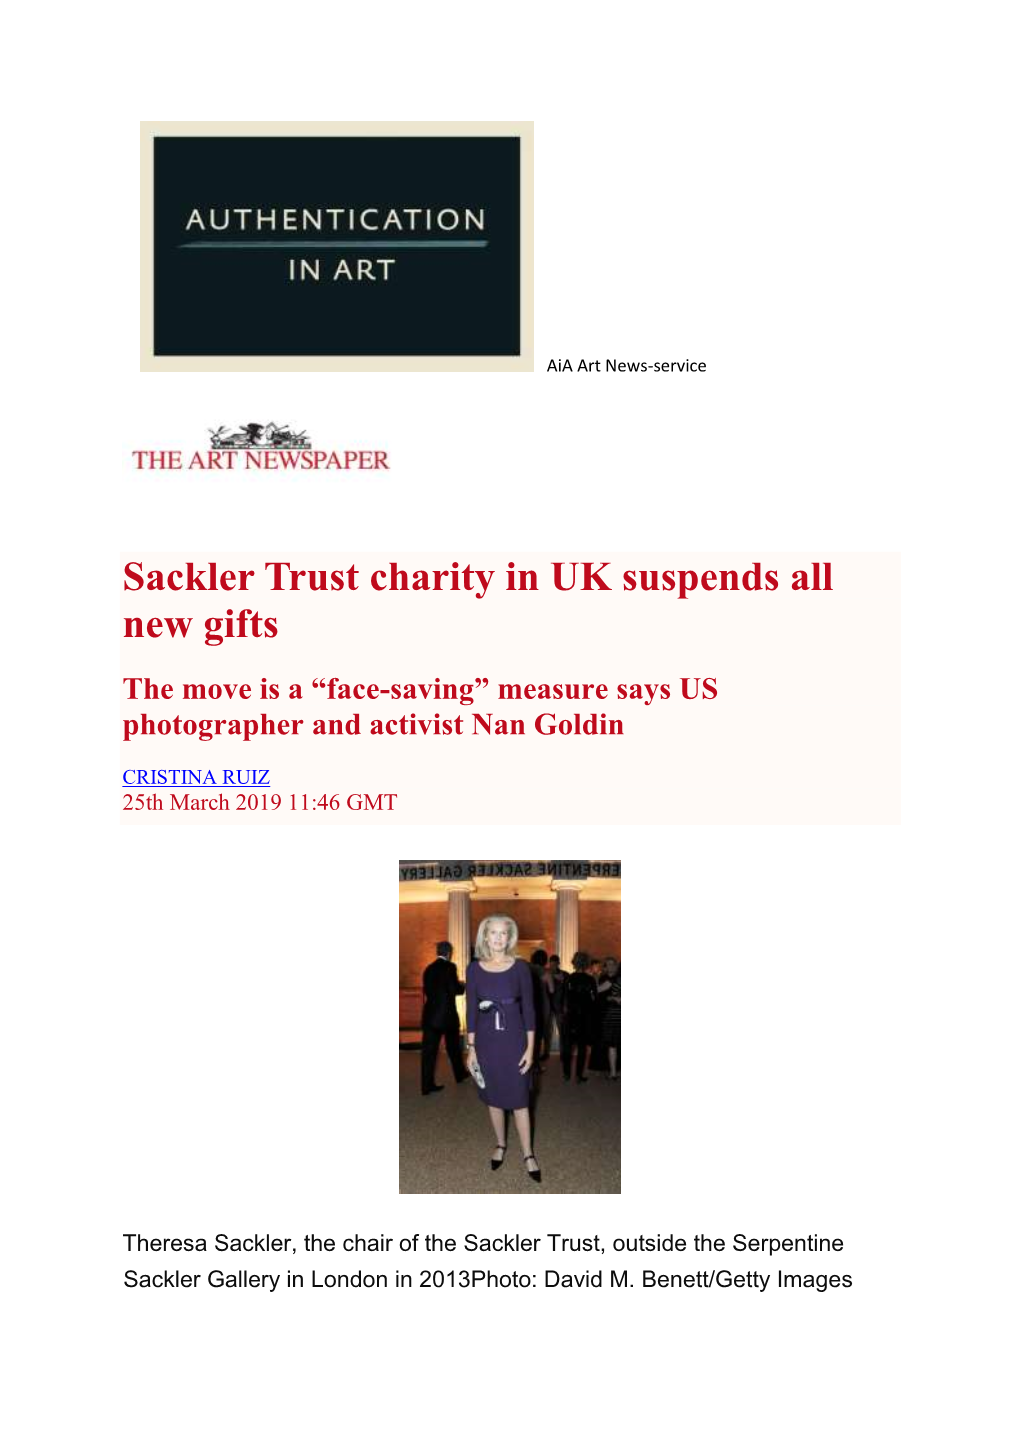 Sackler Trust Charity in UK Suspends All New Gifts the Move Is a “Face-Saving” Measure Says US Photographer and Activist Nan Goldin